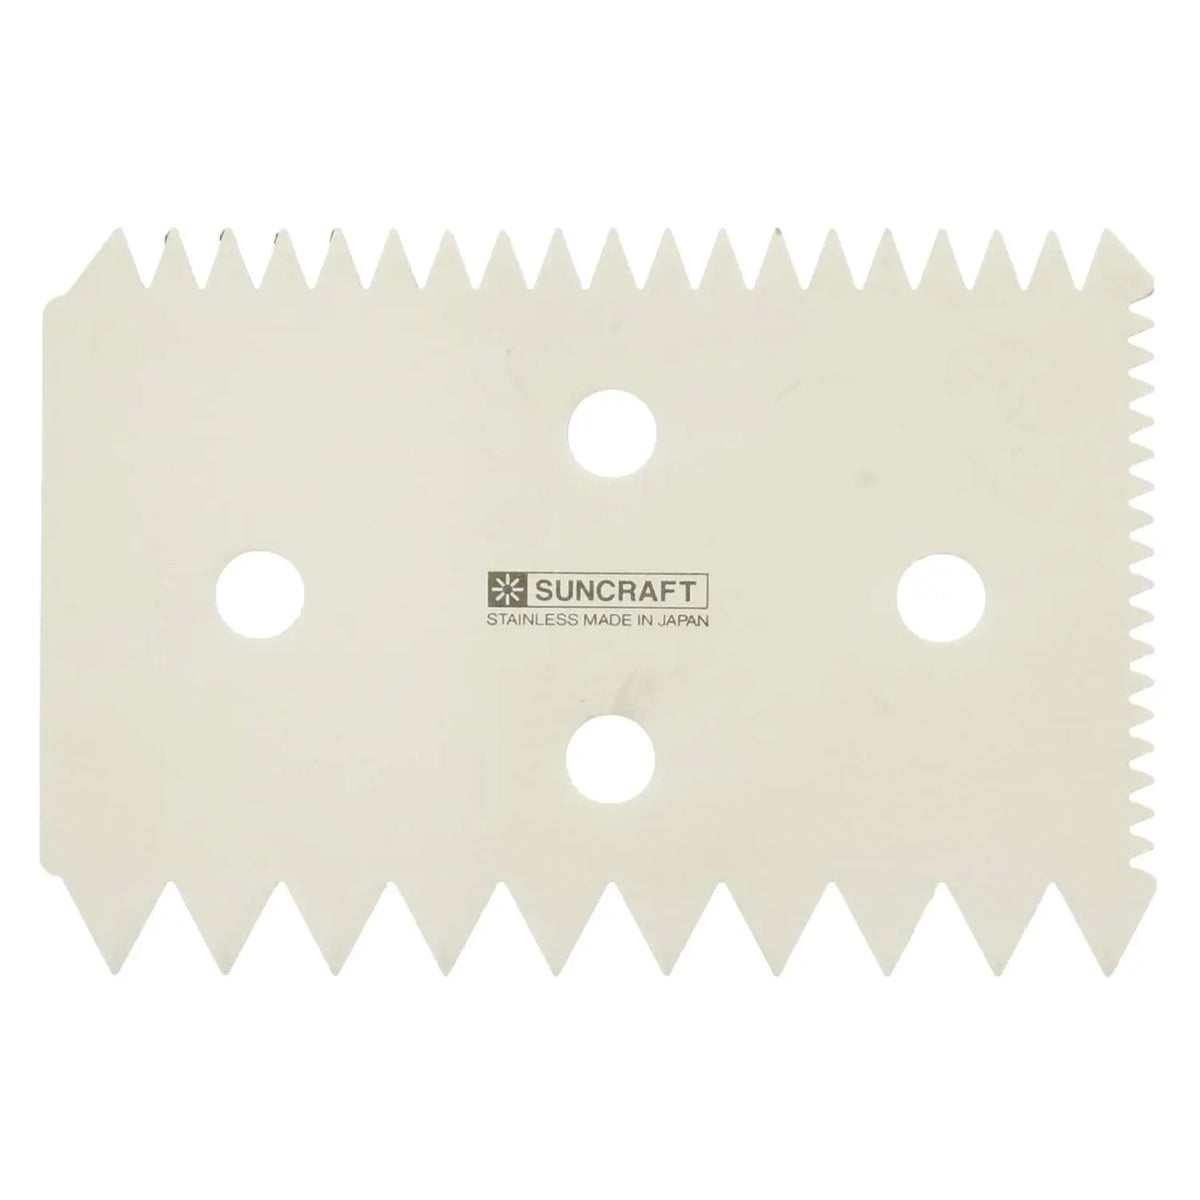 SUNCRAFT Patissiere Stainless Steel Cake Decorating Comb